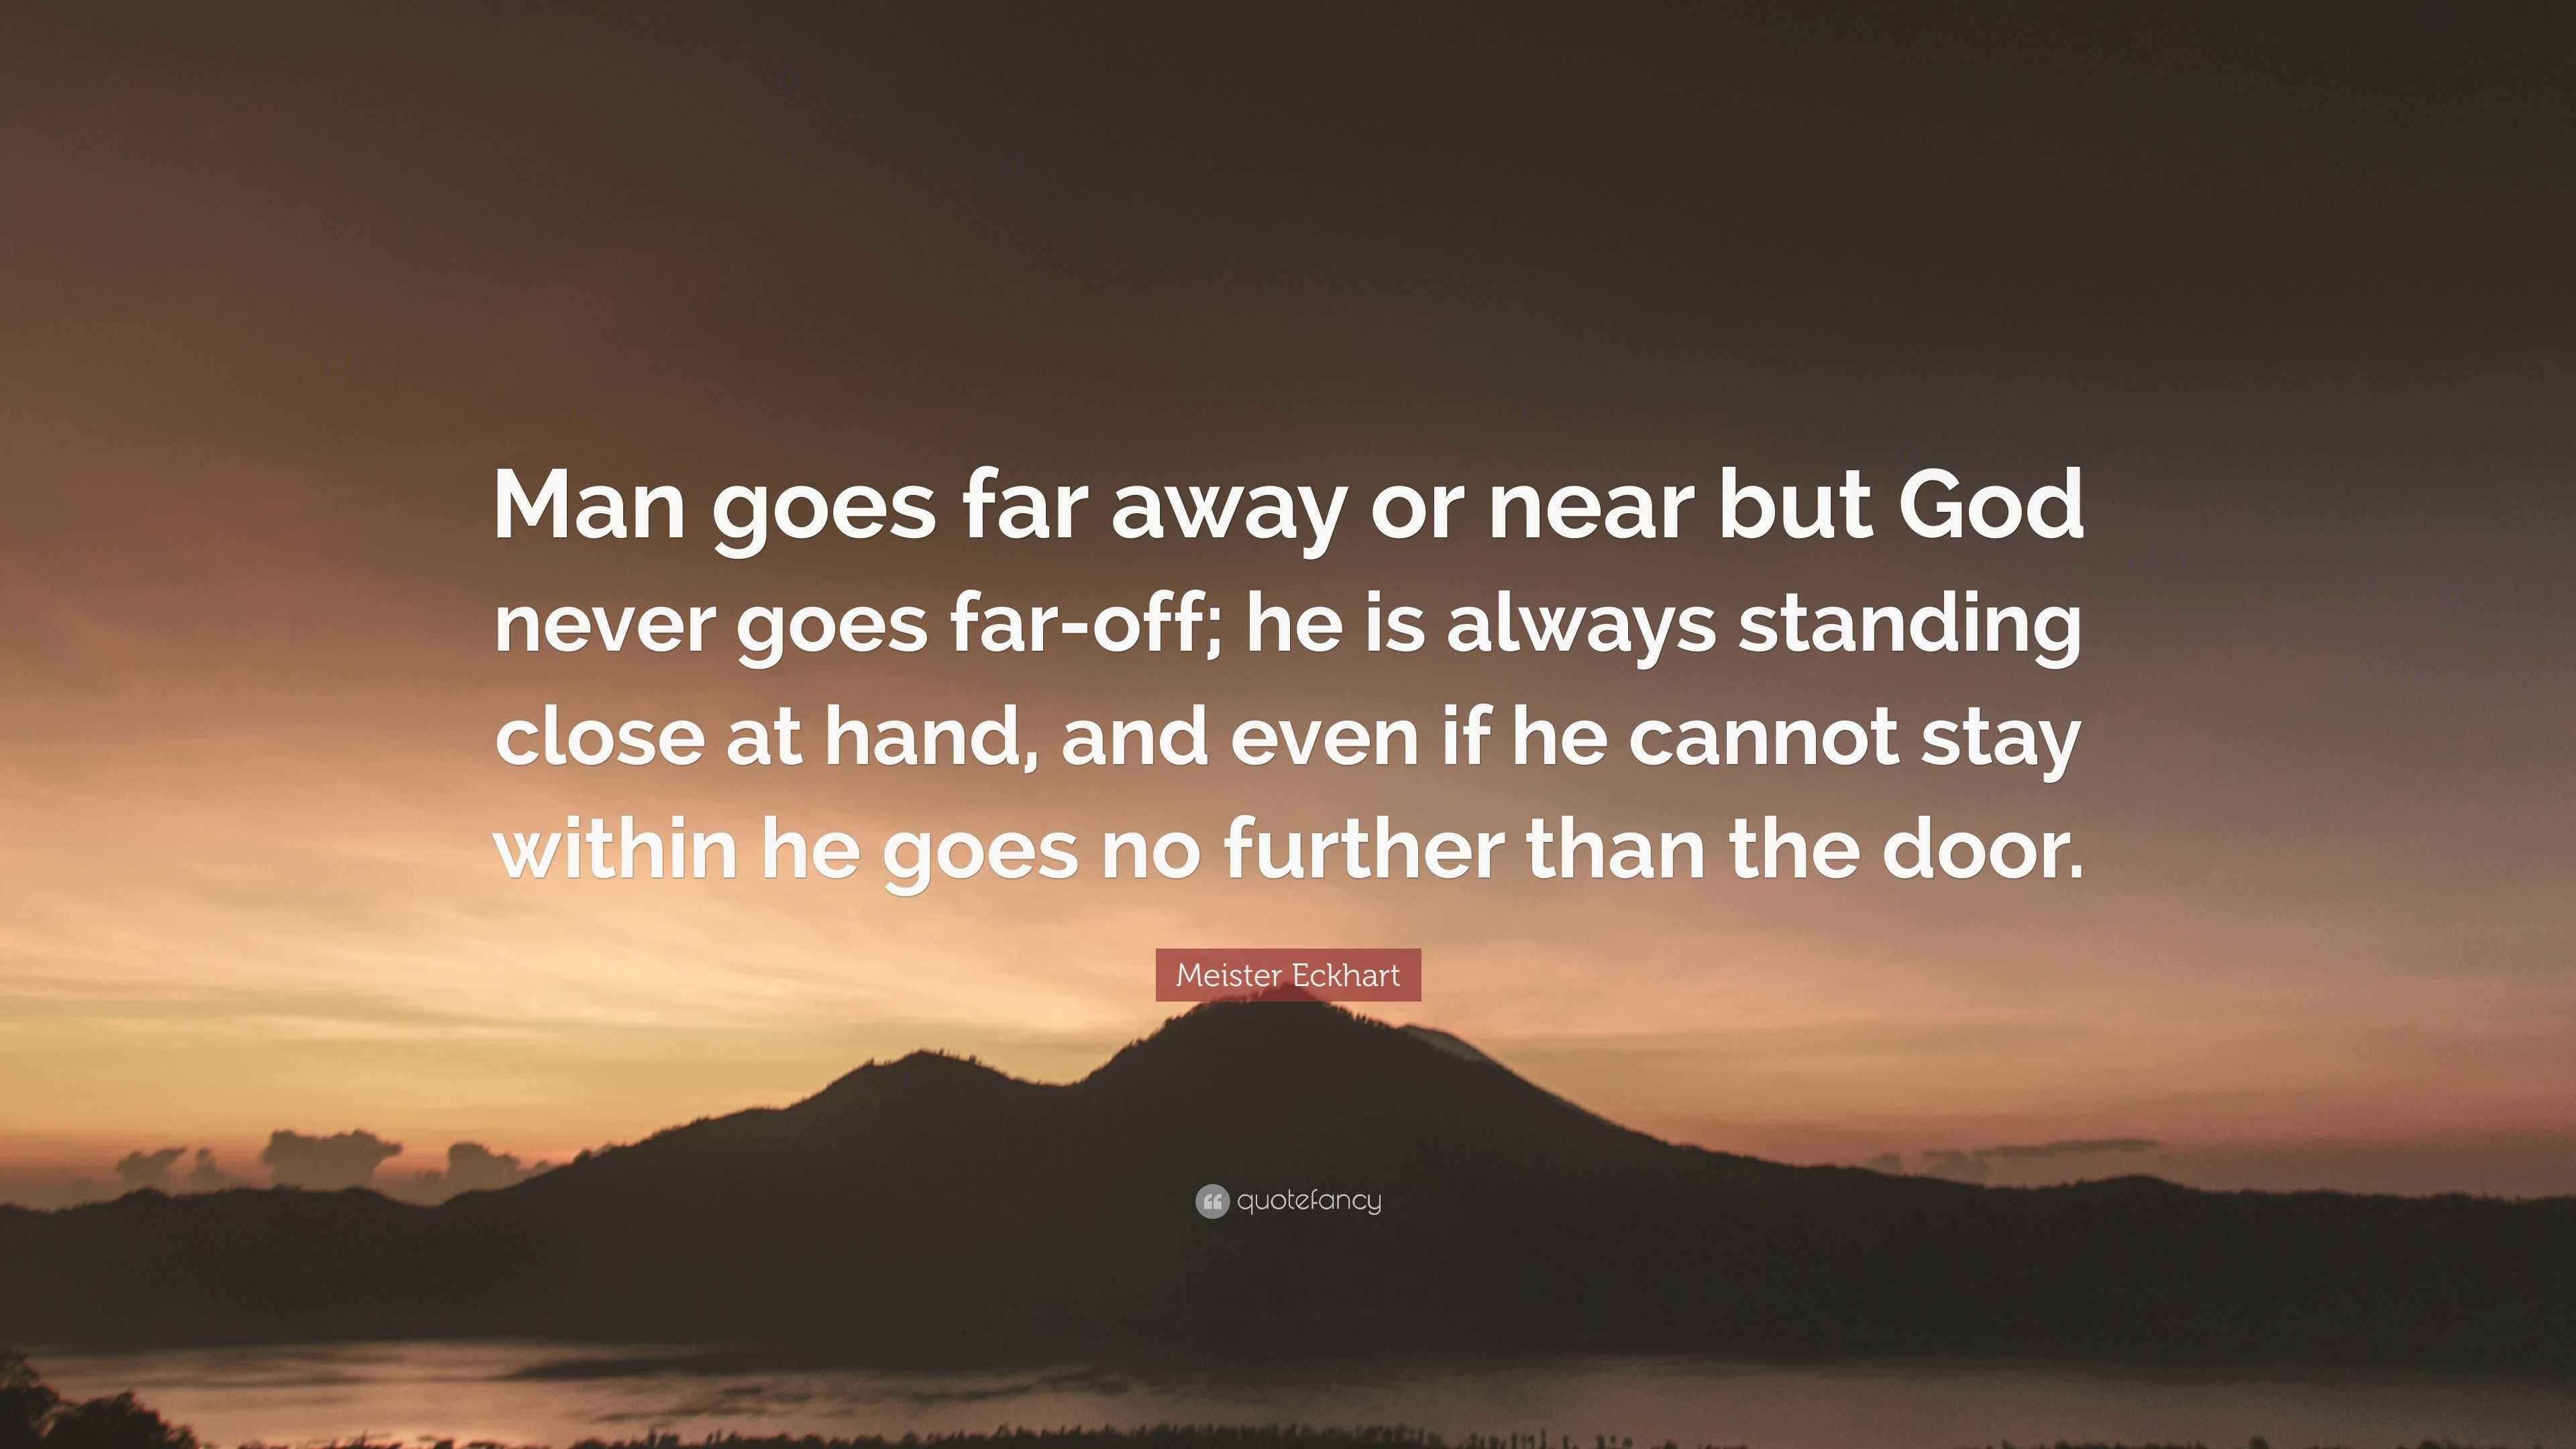 Meister Eckhart Quote: “Man goes far away or near but God never goes ...